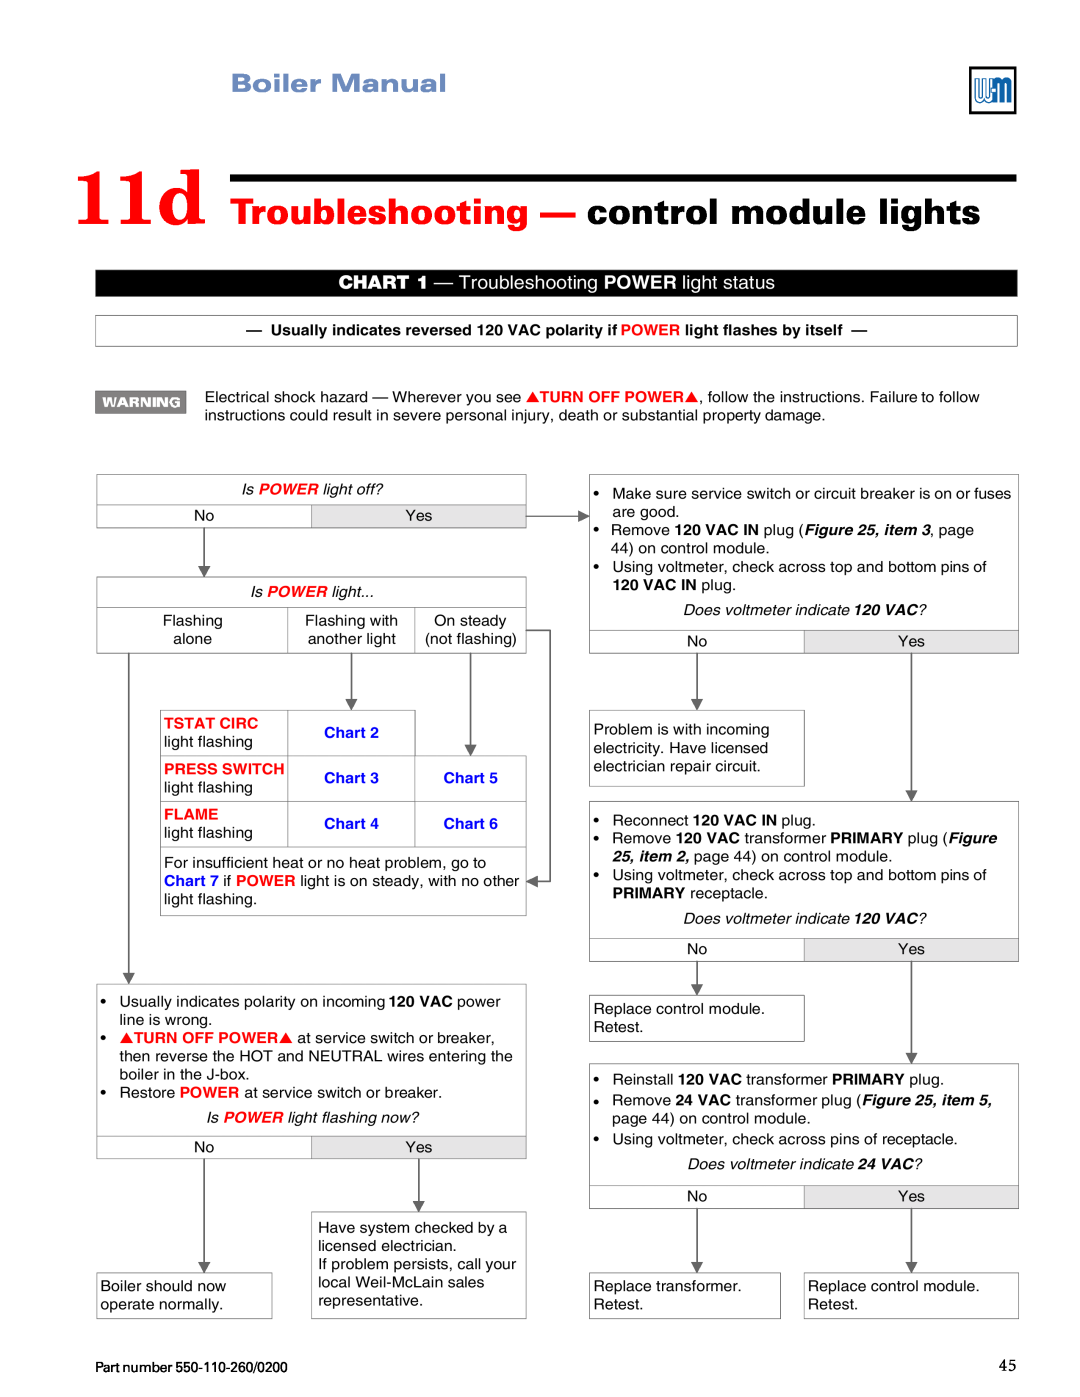 Weil-McLain 550-110-260/02002 manual 11d Troubleshooting - control module lights, Boiler Manual, Is POWER light off?, Chart 